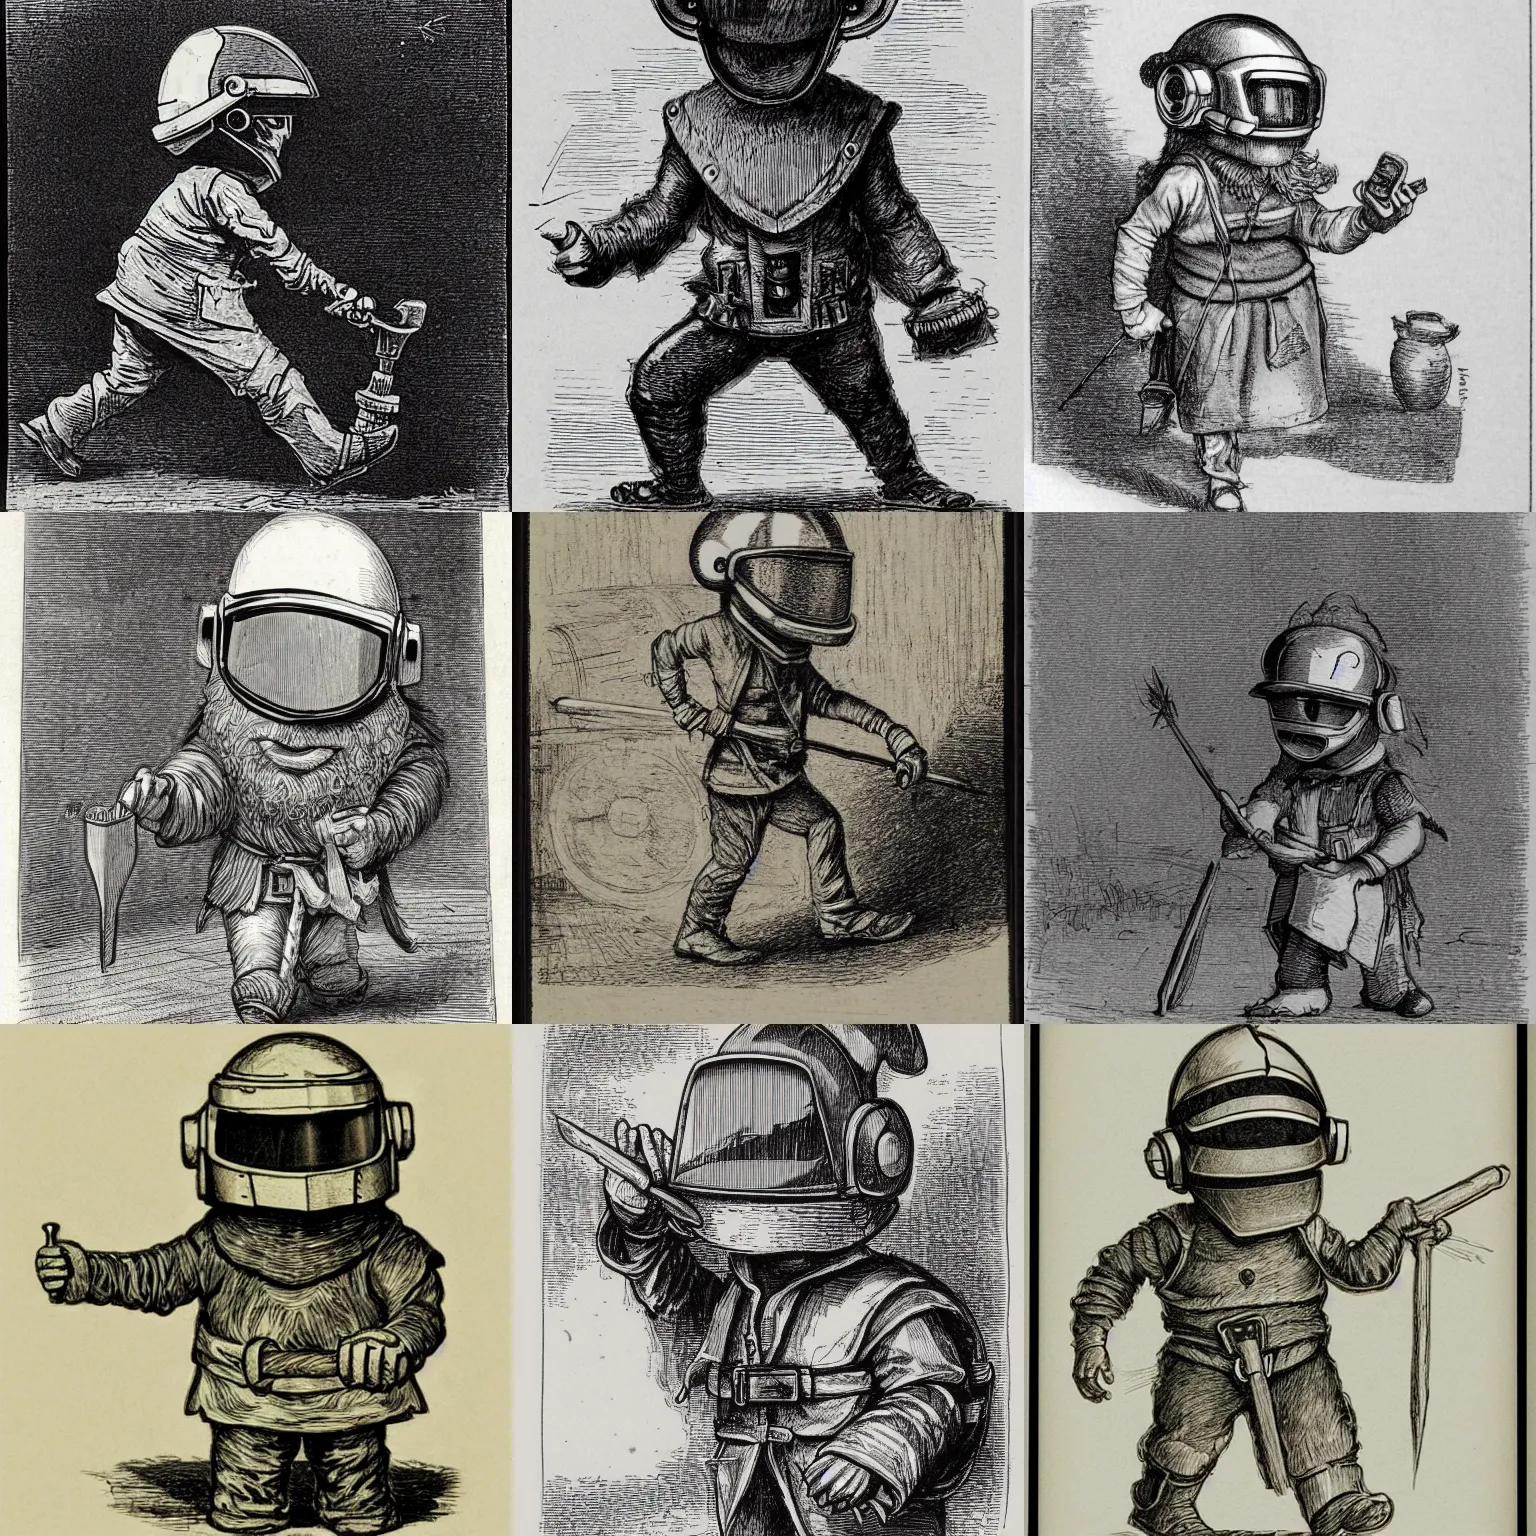 Prompt: sketch of a cute funny chibi dnd gnome woodworker wearing a daft punk helmet and walking, etching by louis le breton, 1 8 6 9, 1 2 0 0 dpi scan